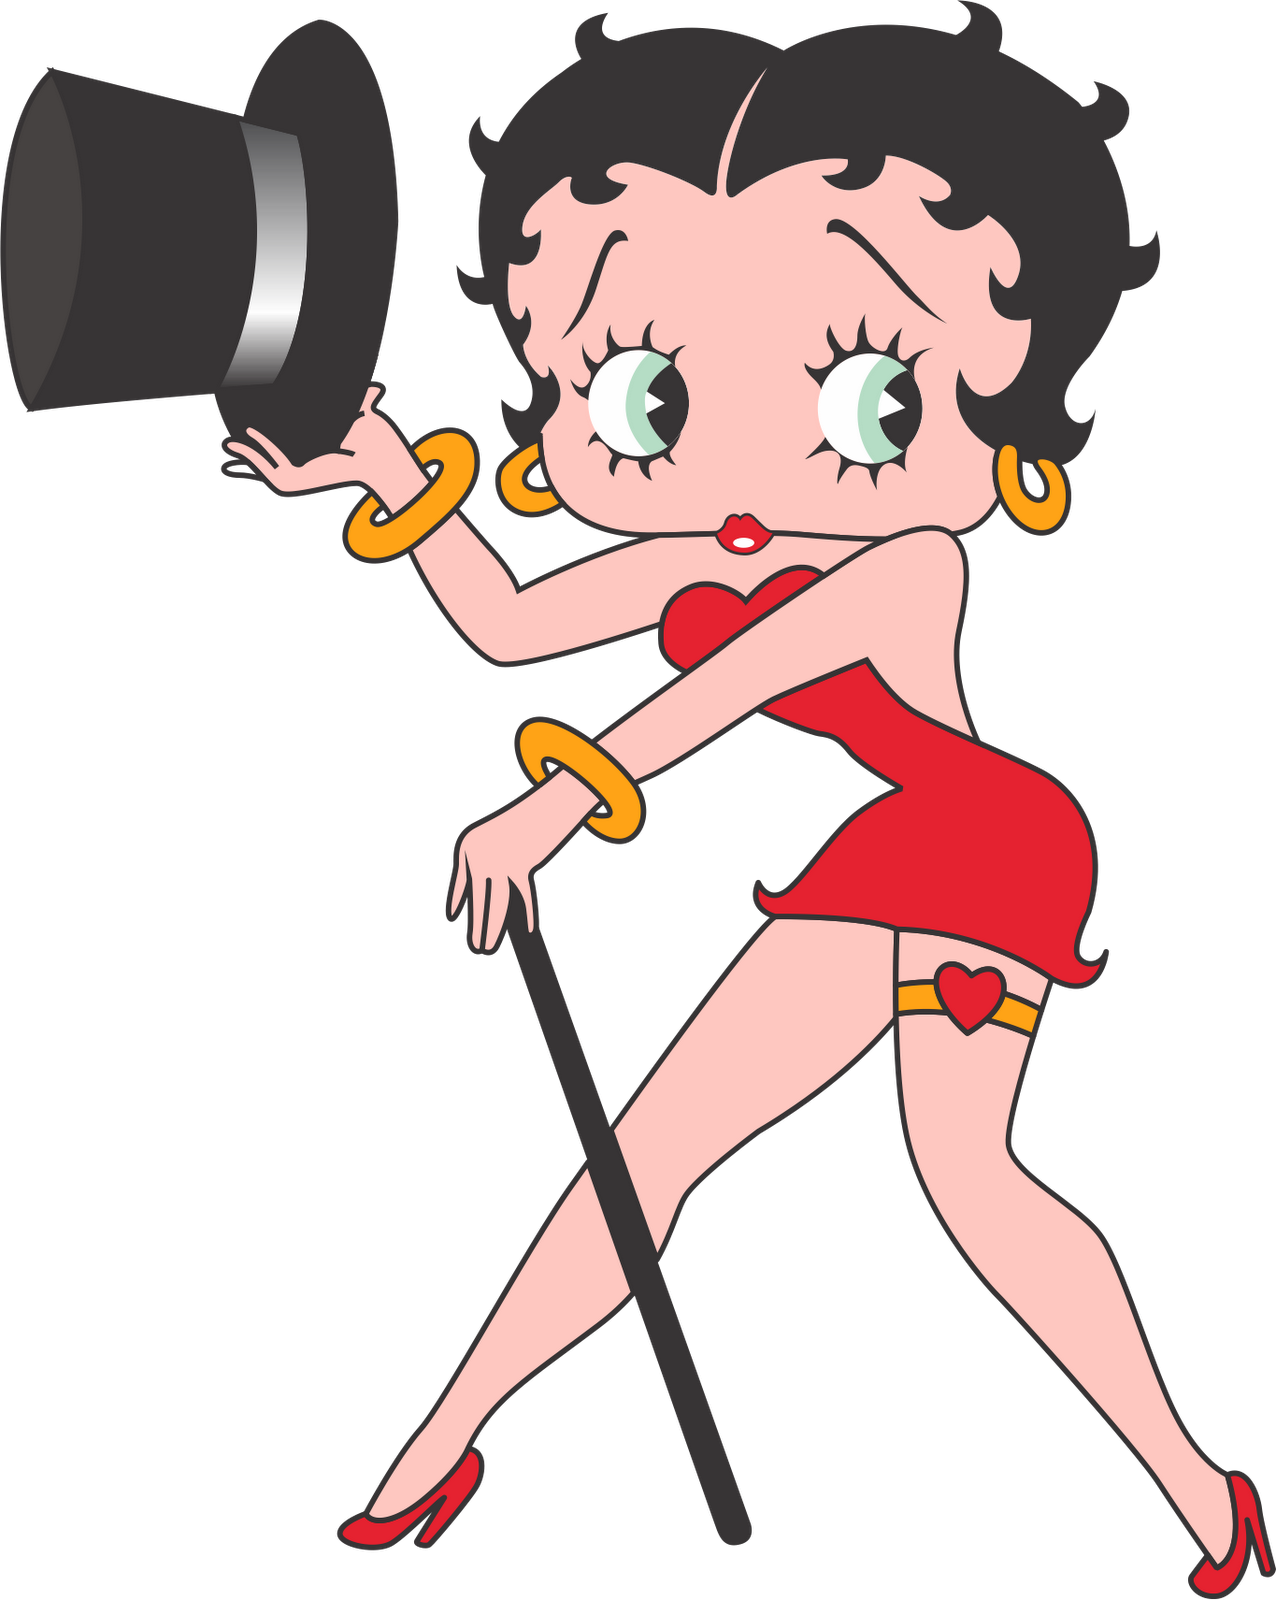 Free Download Dibujos Animados Betty Boop Hd Wallpaper - Famous Girl Cartoon Characters (1276x1600)